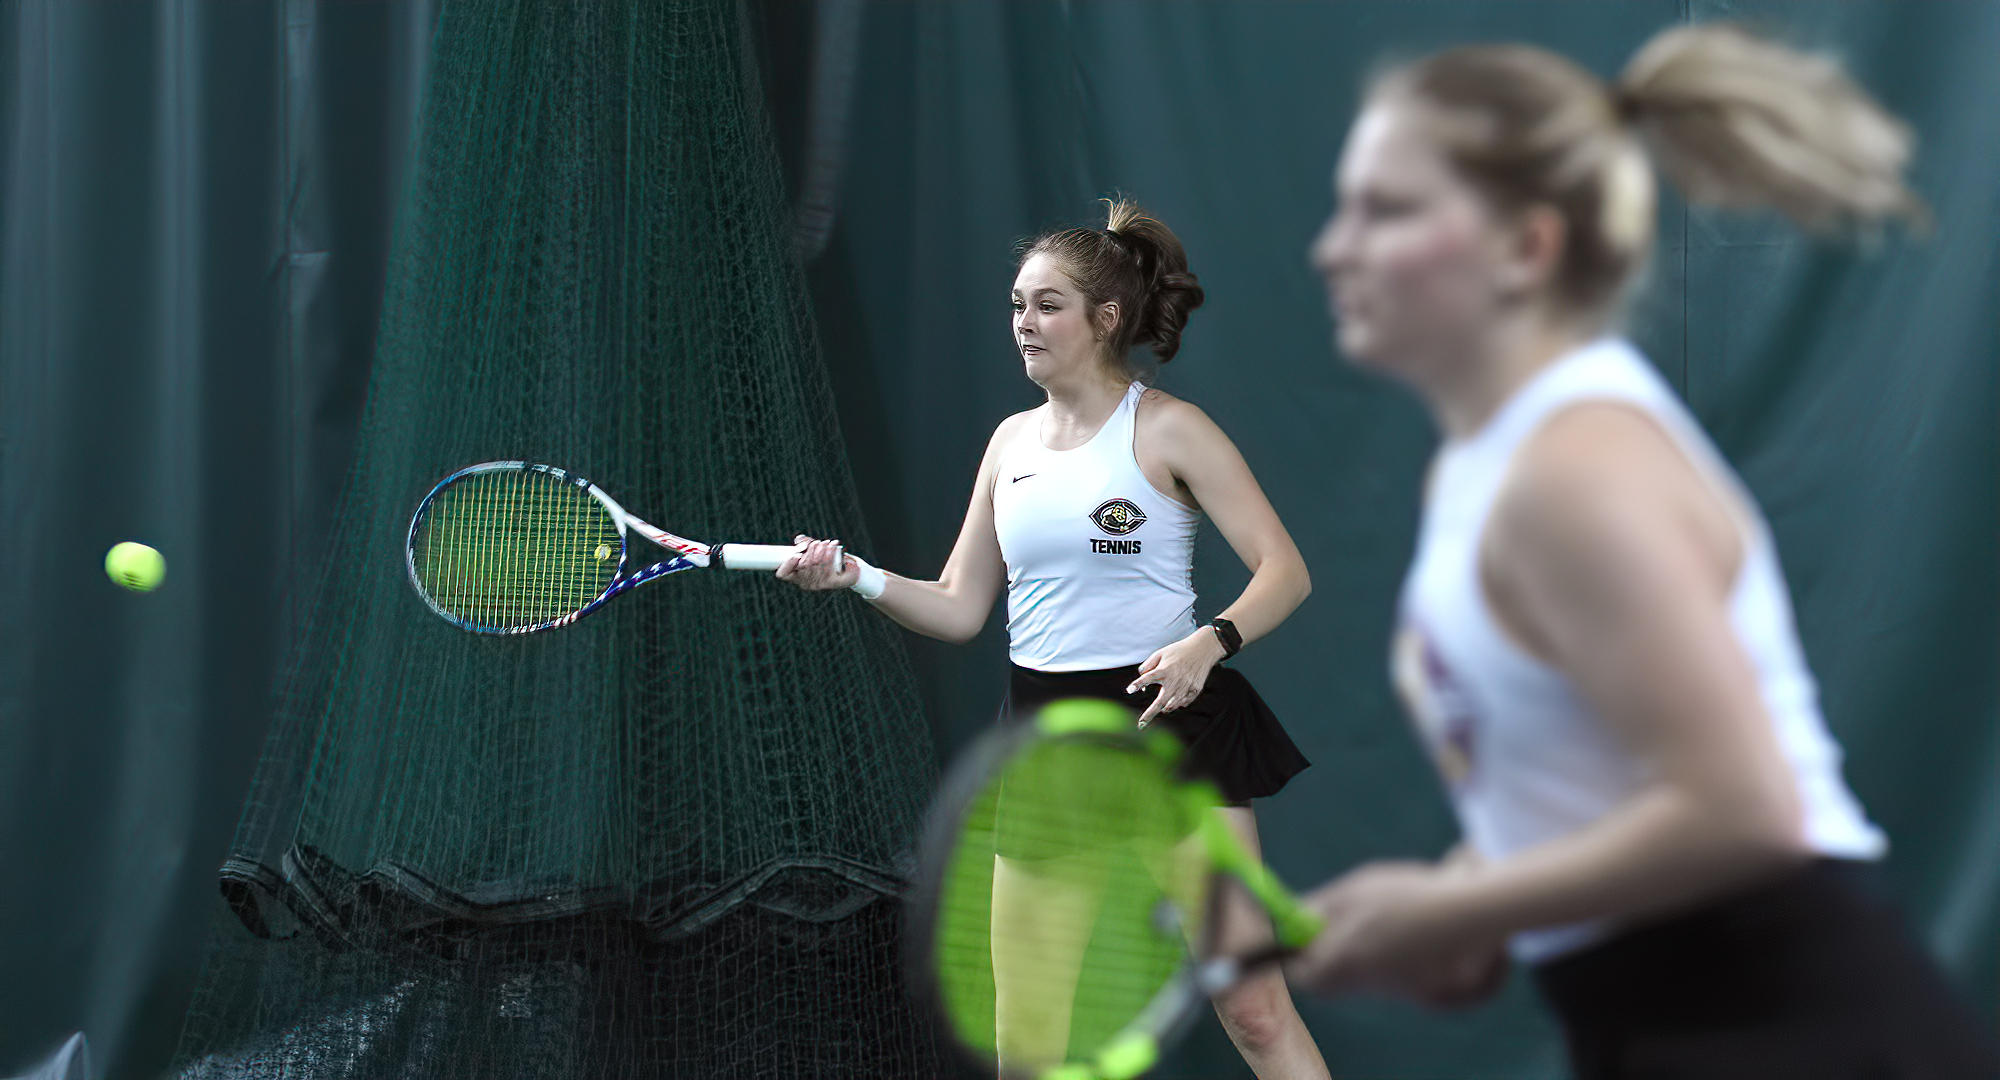 Junior Raquel Egge (L) hits a forehand return as her doubles partner Mark Skorich is in the foreground. The duo went 3-0 over the weekend.